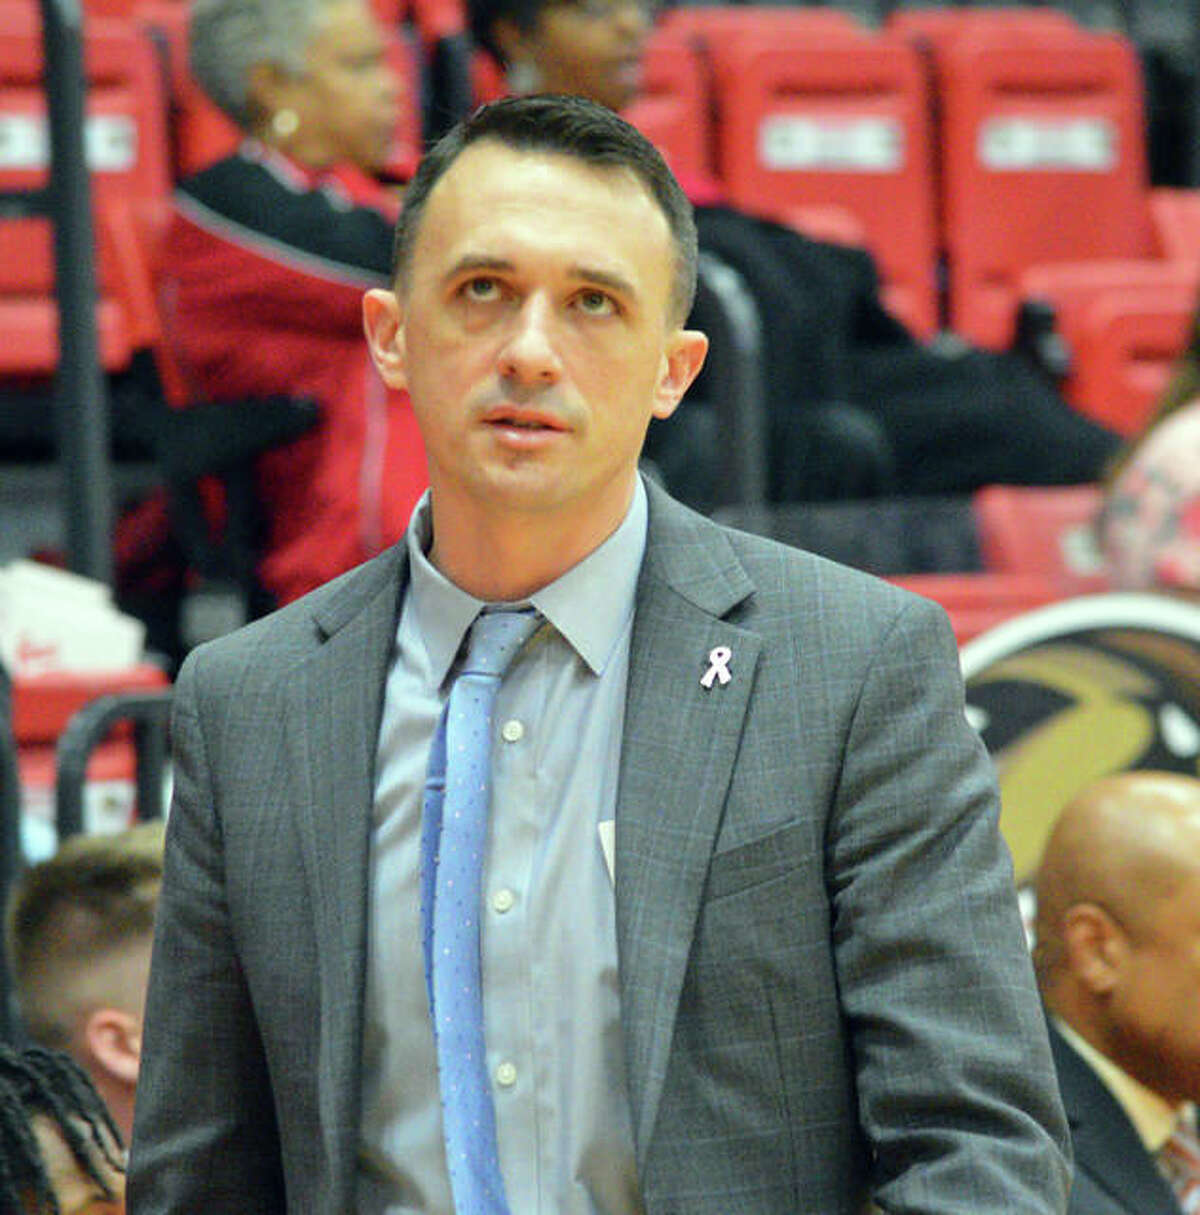 SIUE men’s basketball coach Brian Barone is in favor of student-athletes having the ability to earn compensation for endorsements and promotions but is concerned about how the rule will be administered.